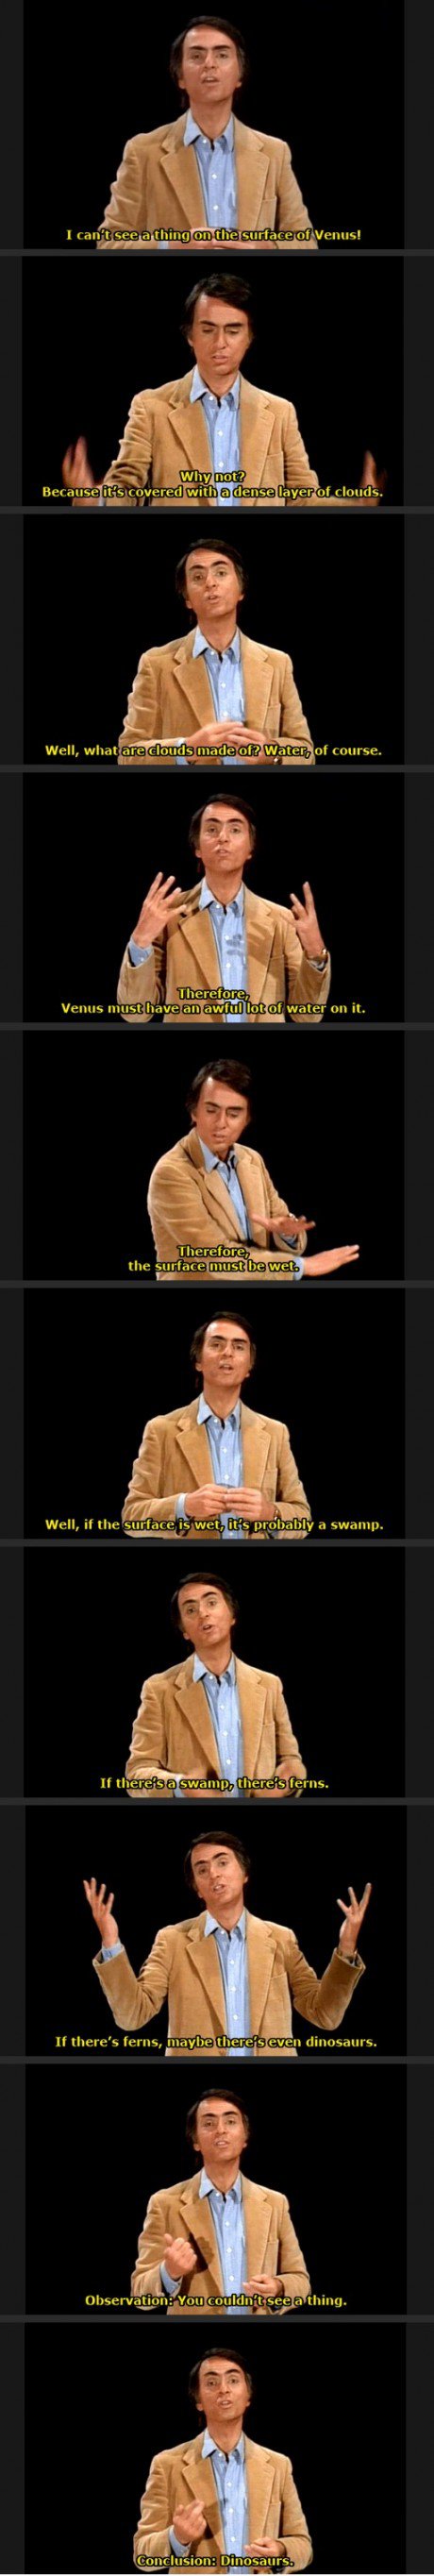 Carl Sagan pointing out the detriment of drawing conclusions believing something without facts.